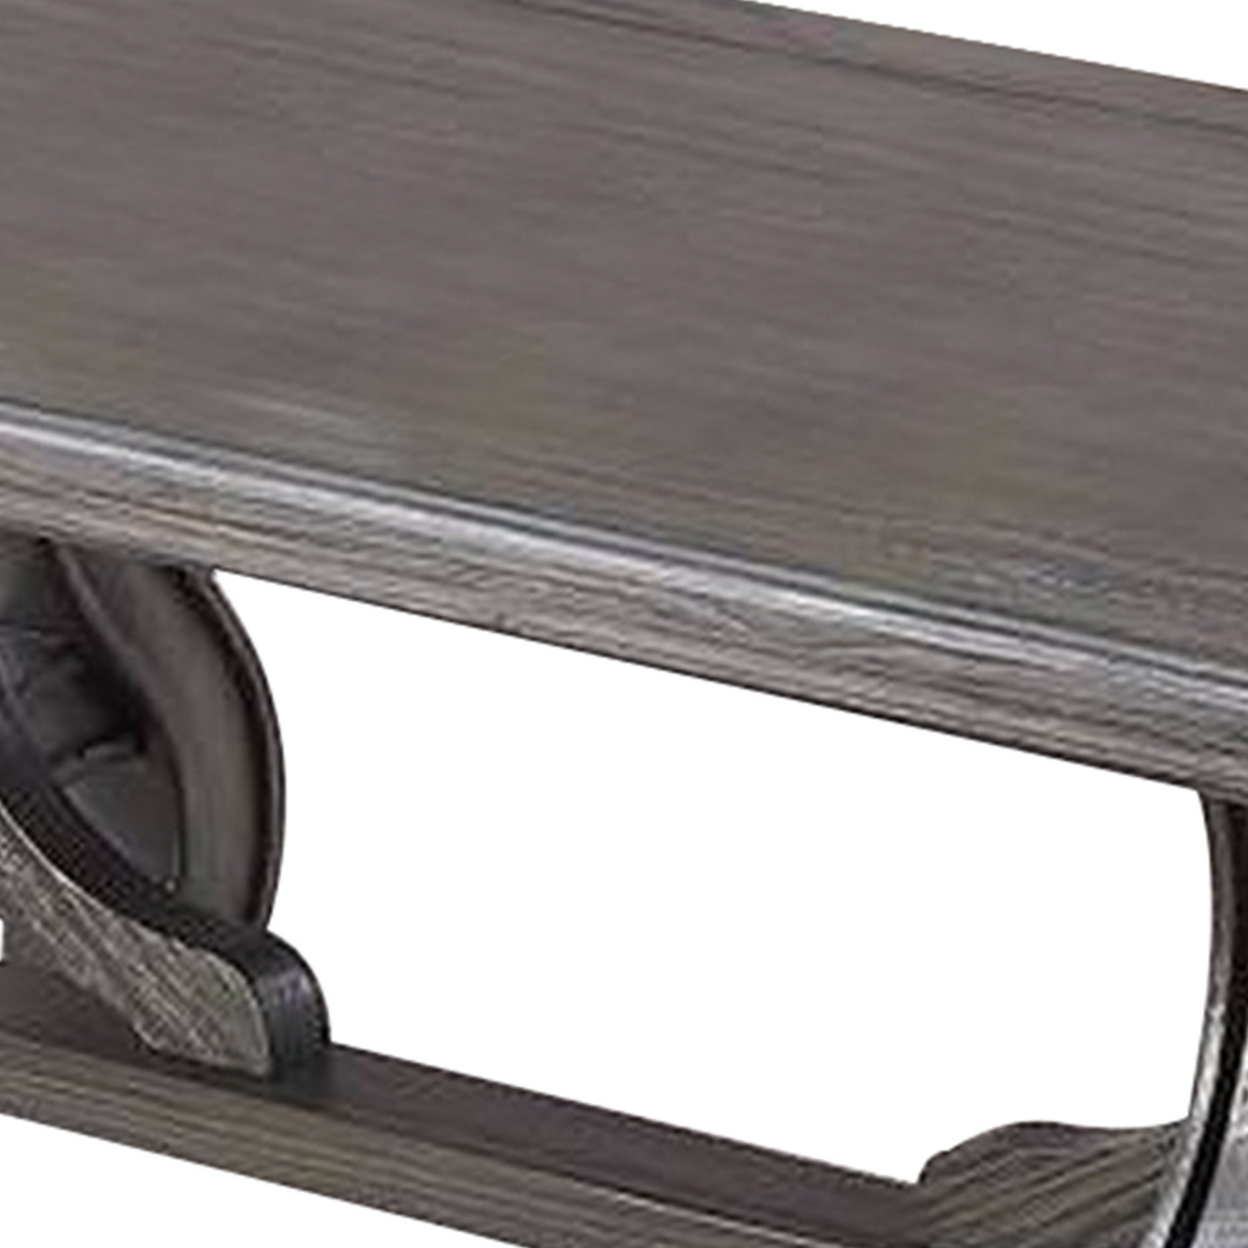 Jax 48 Inch Contemporary Coffee Table, Flared Legs, Beveled, Platinum Gray